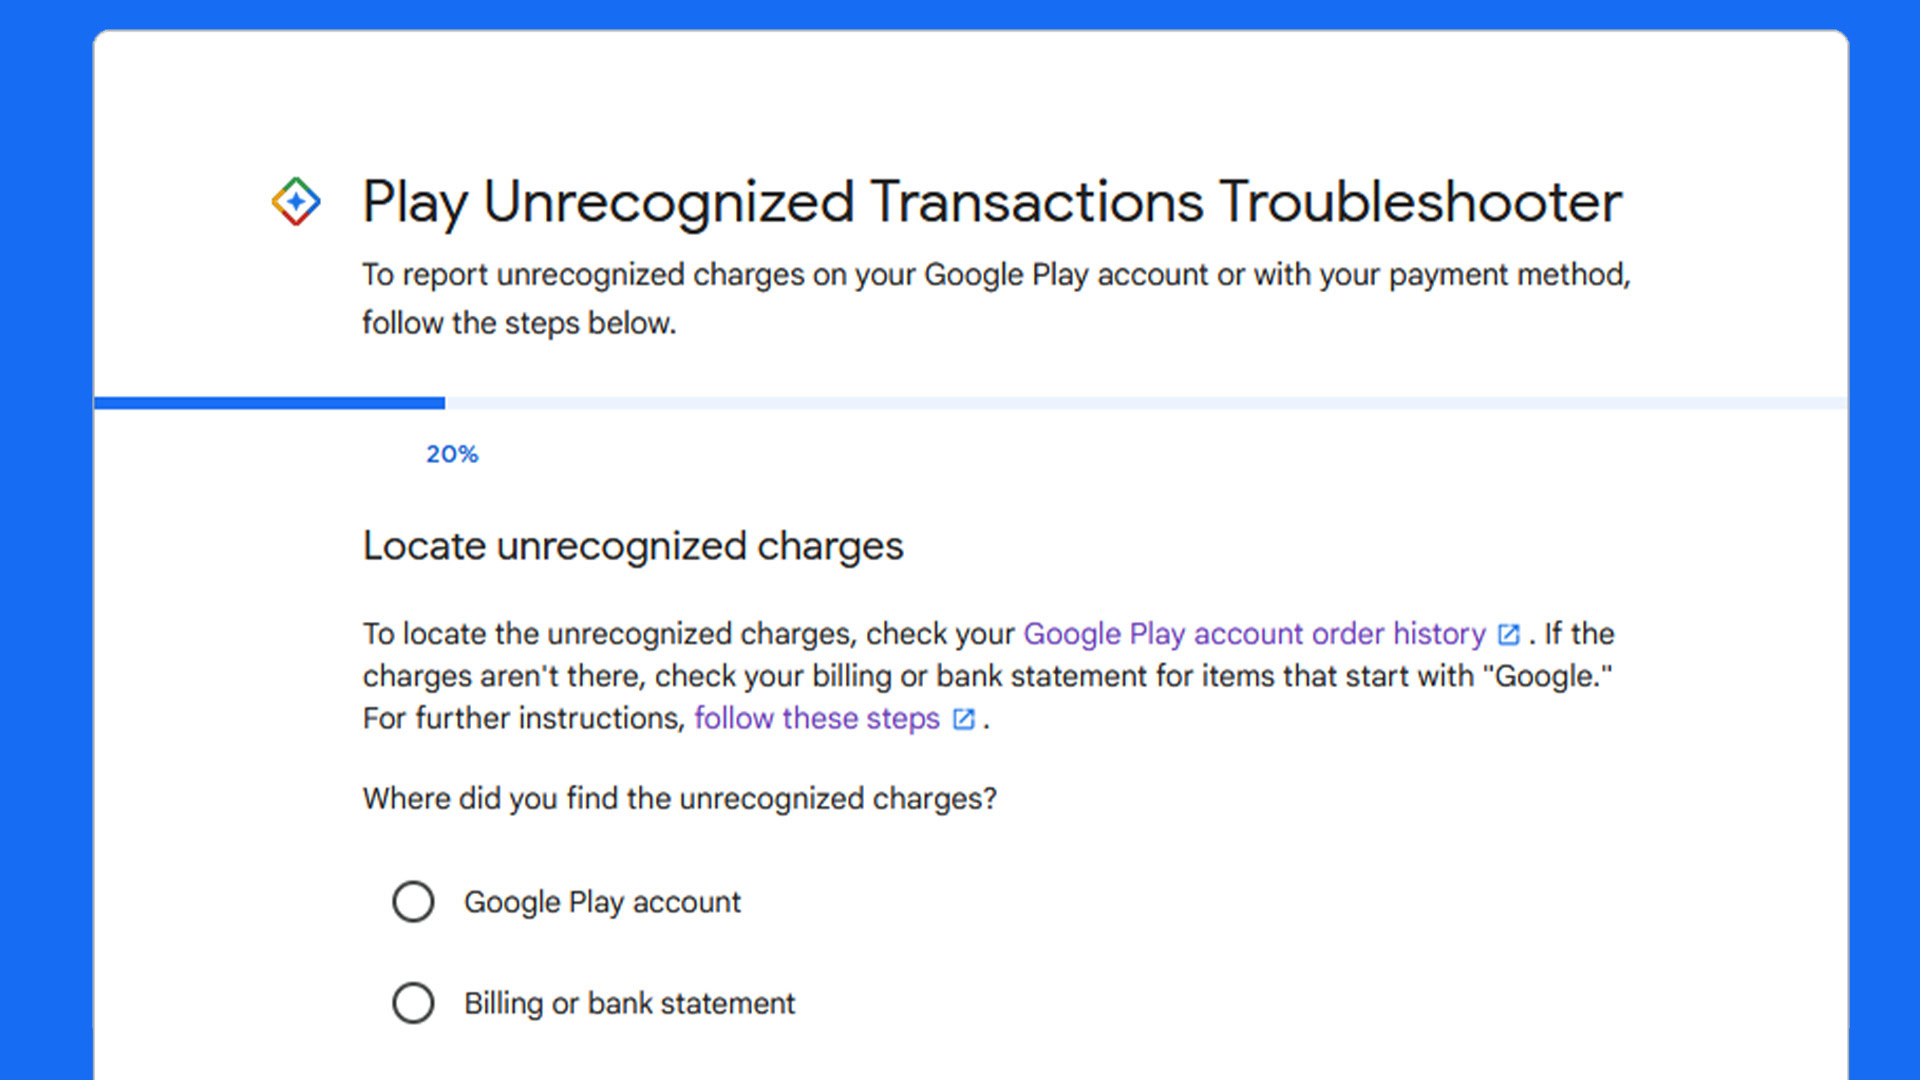 Google Play Unrecognized Transacations